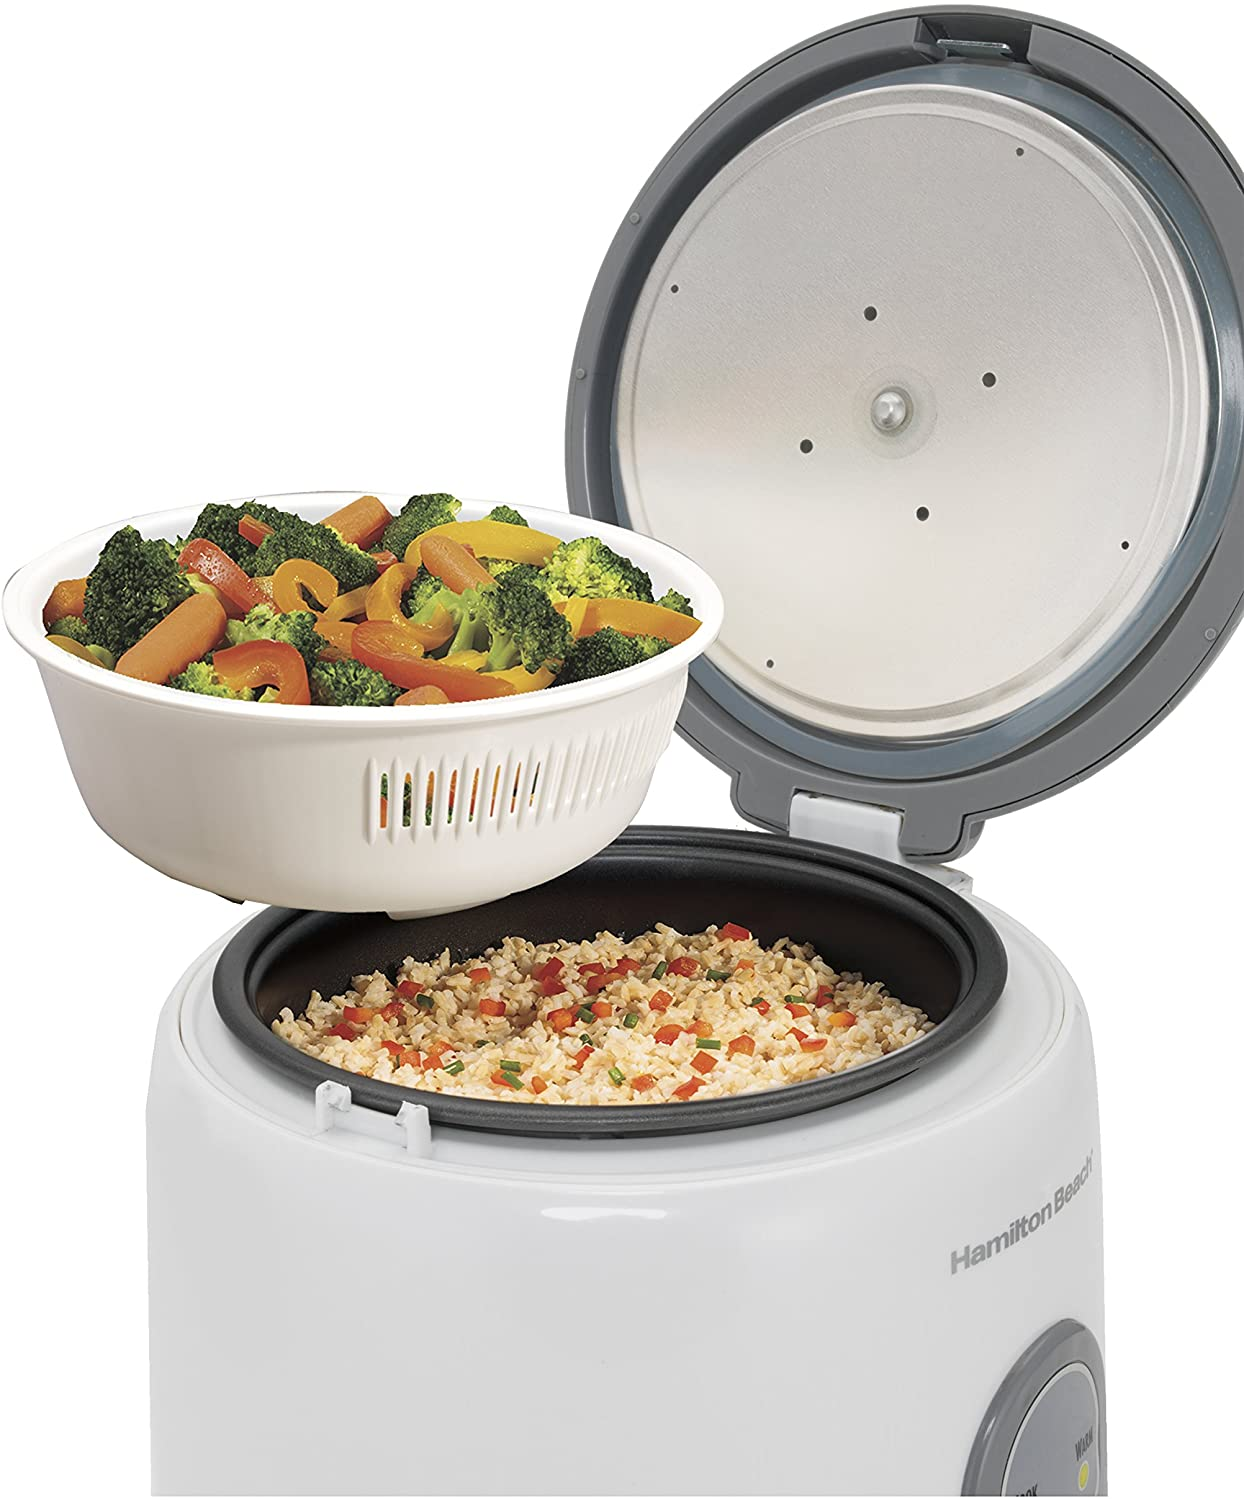 Proctor Silex 10 Cup Rice Cooker 